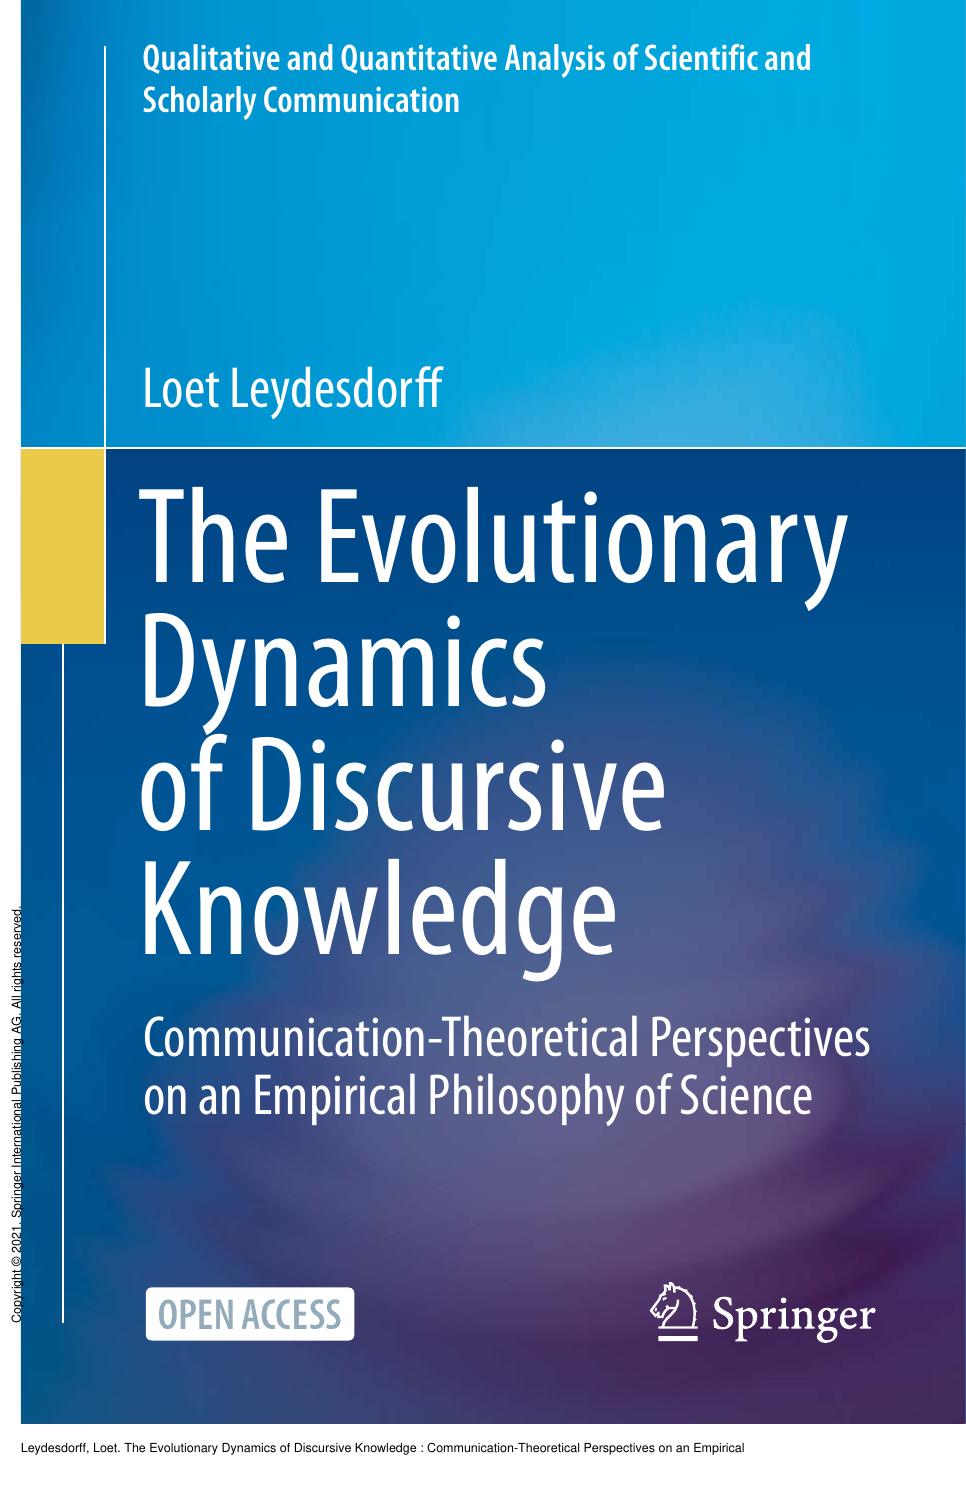 The Evolutionary Dynamics of Discursive Knowledge : Communication-Theoretical Perspectives on an Empirical Philosophy of Science by Loet Leydesdorff